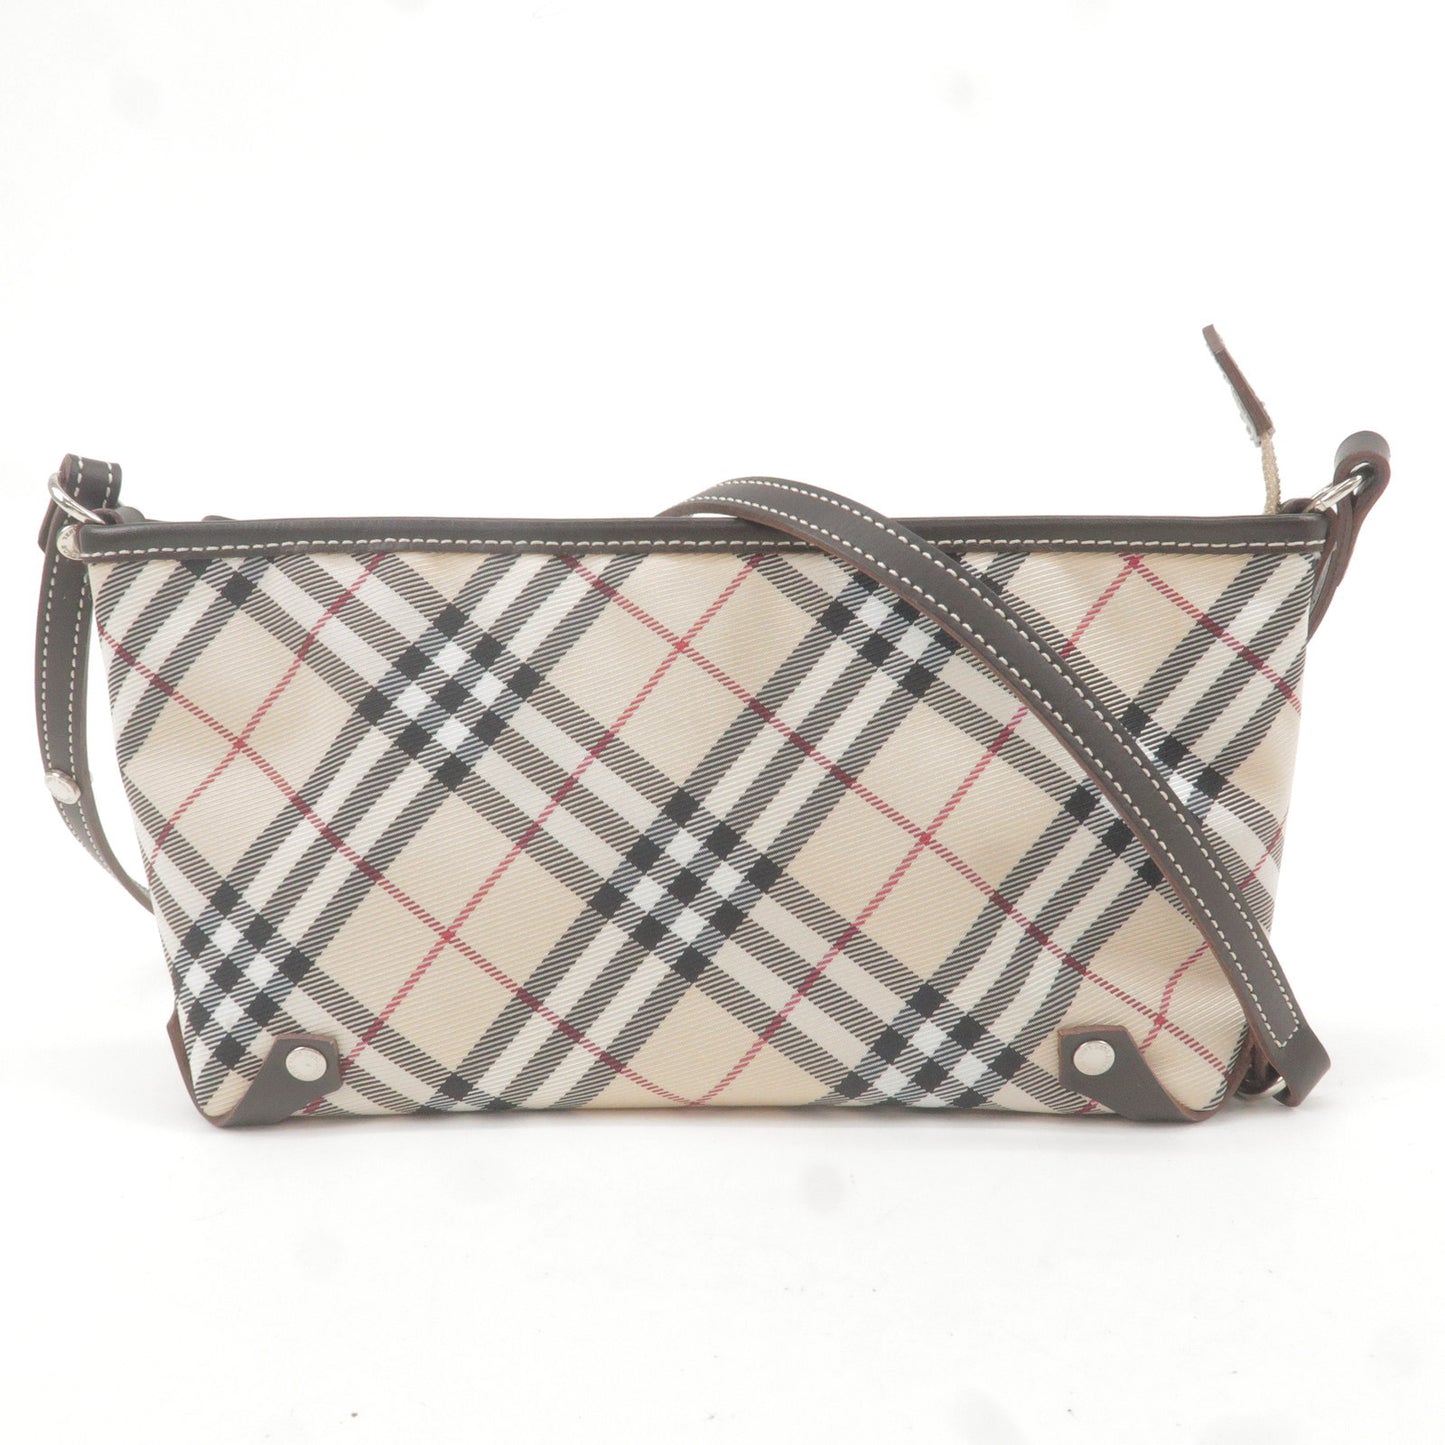 Vintage Burberry Nova Check bag leather and suede Multiple colors